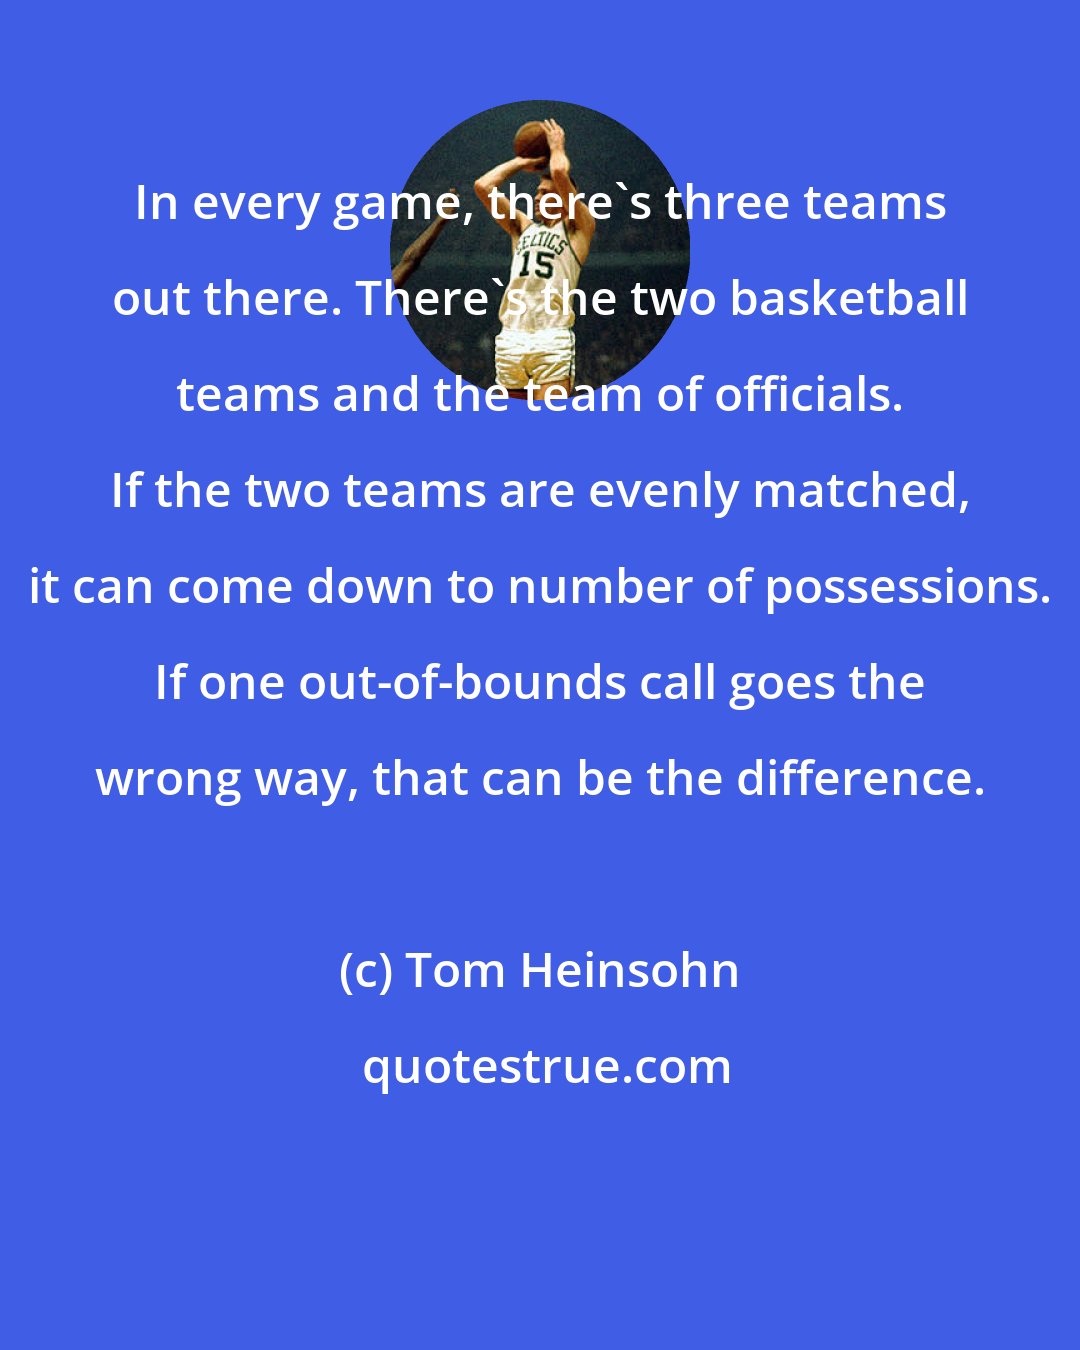 Tom Heinsohn: In every game, there's three teams out there. There's the two basketball teams and the team of officials. If the two teams are evenly matched, it can come down to number of possessions. If one out-of-bounds call goes the wrong way, that can be the difference.